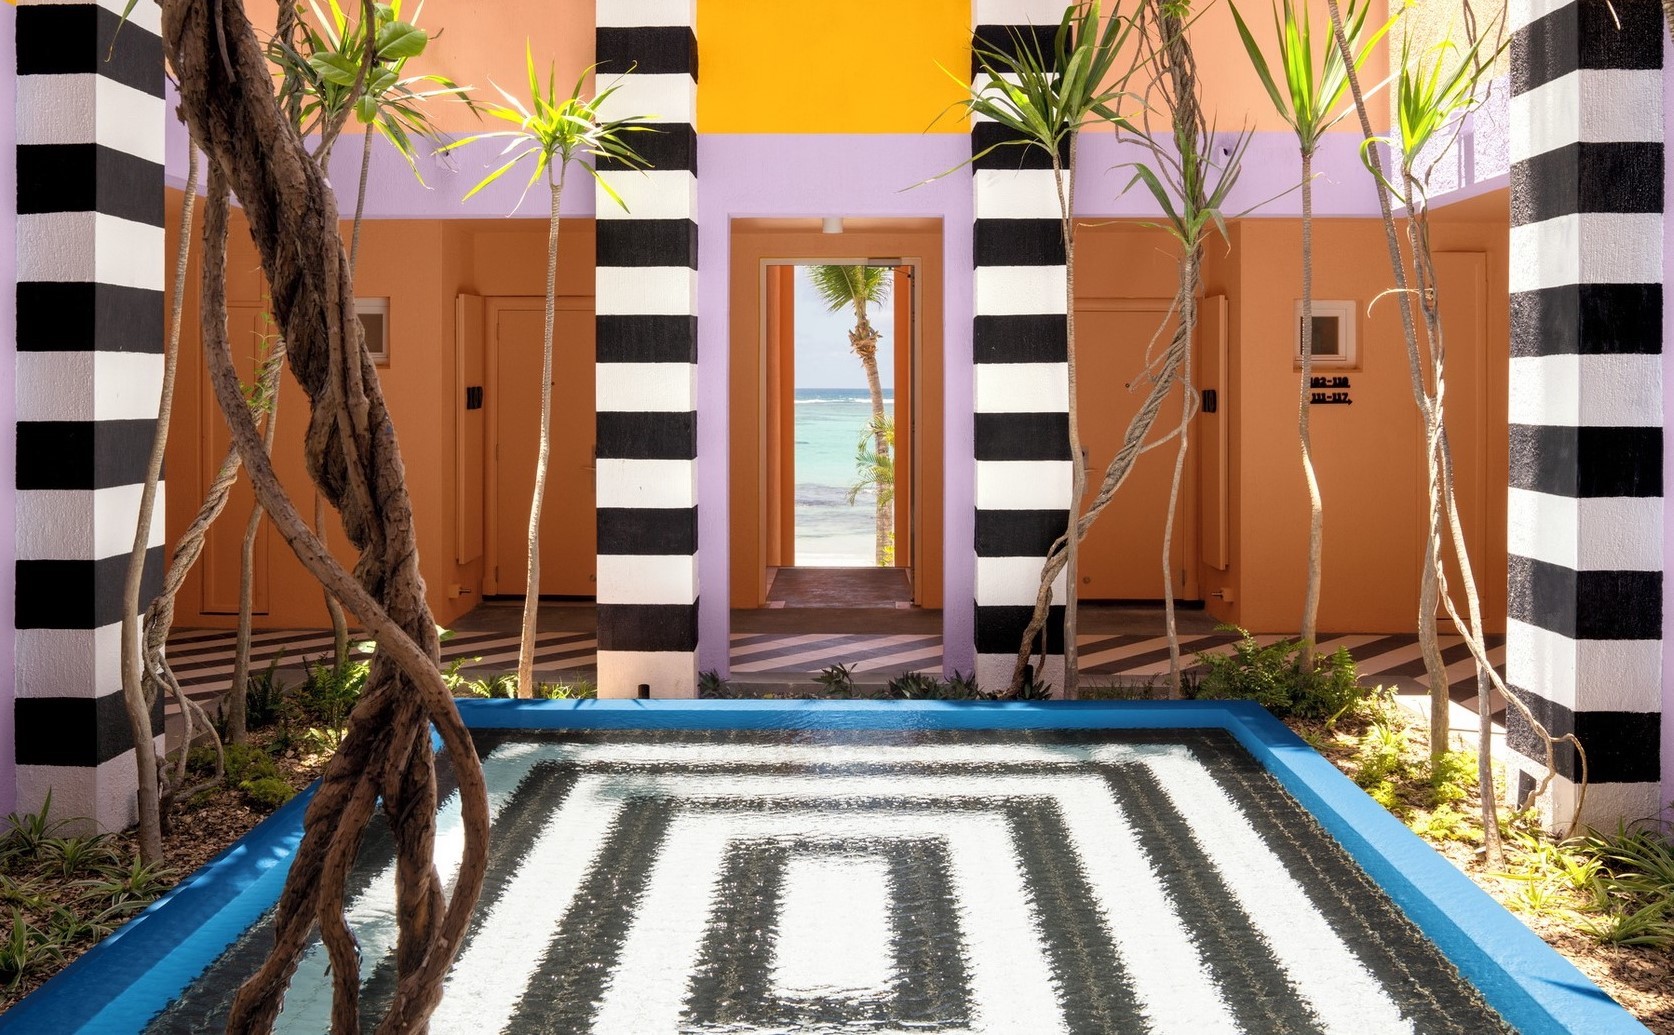 Designer and artist Camille Walala went all-in on stripes at Mauritius boutique hotel Salt of Palmar - Effect Magazine
